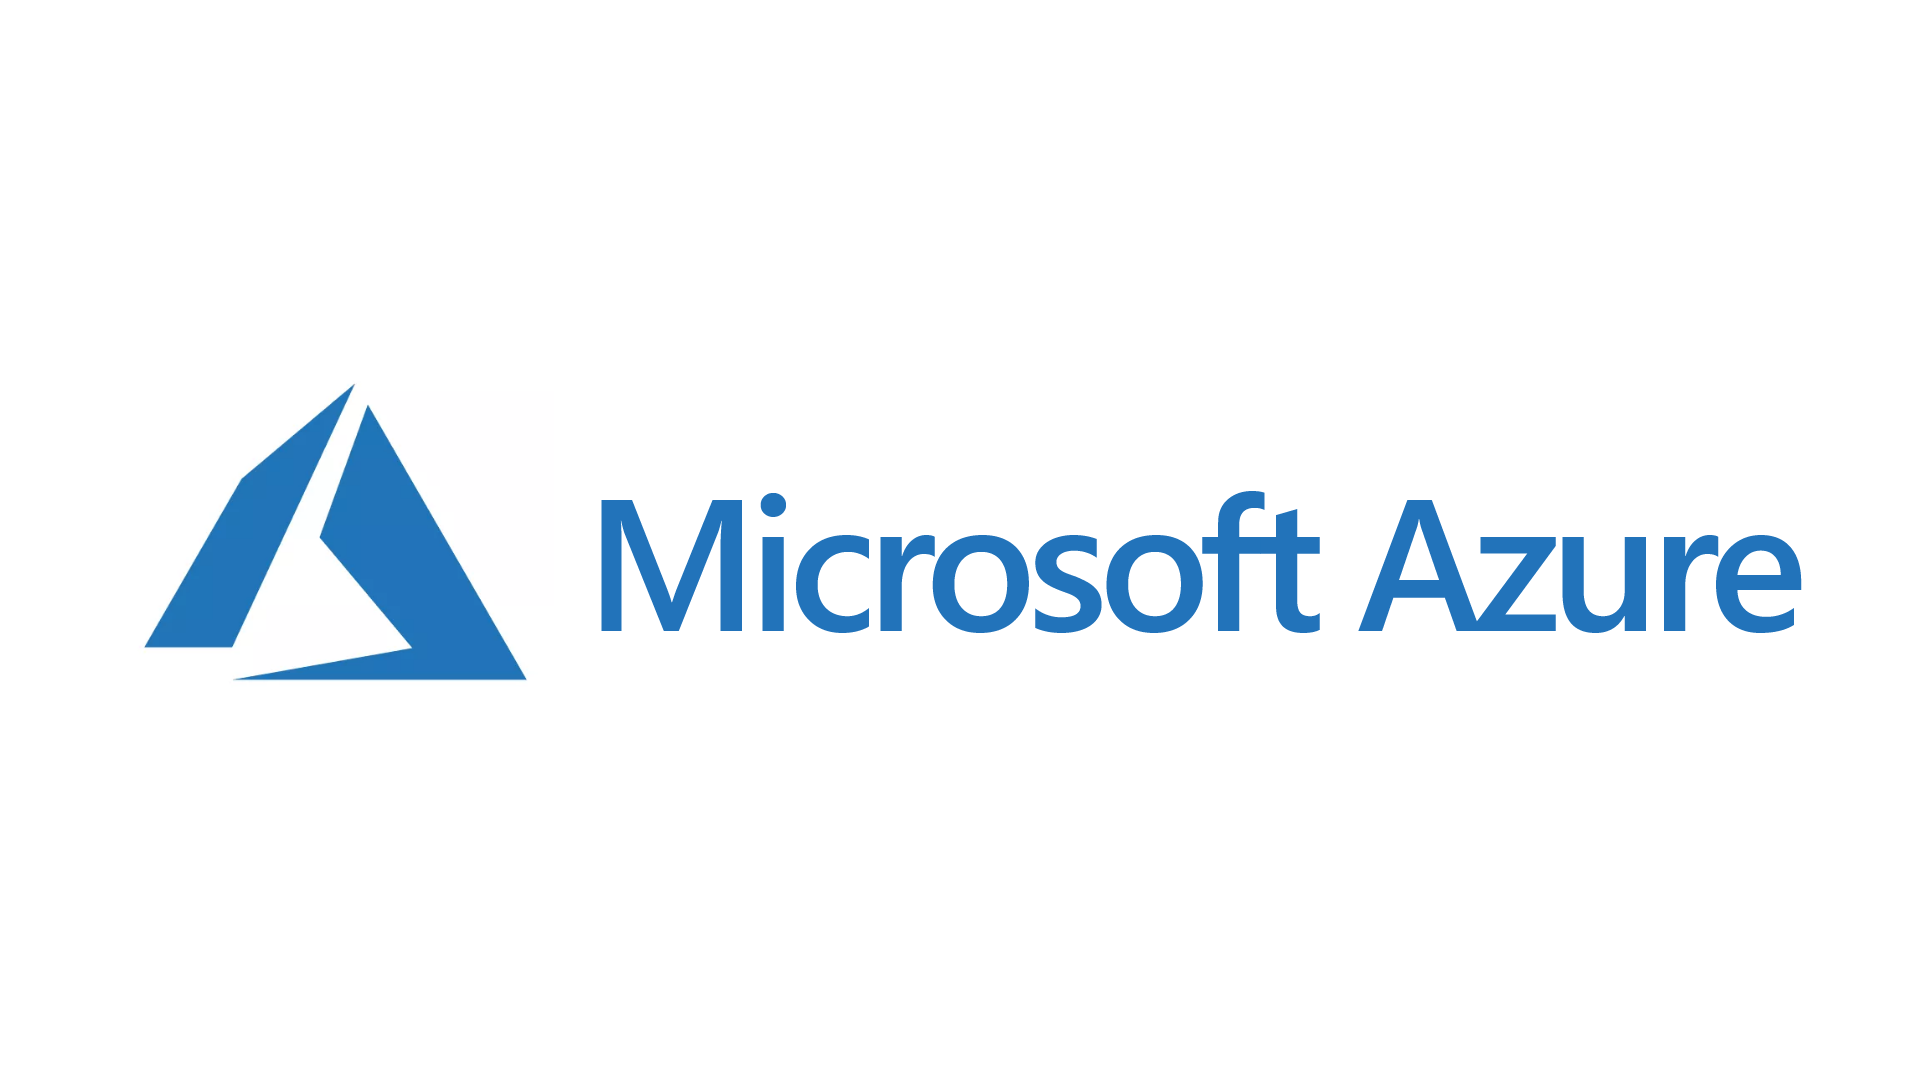 So if you are searching for high-quality Azure web developers, we have got you covered!